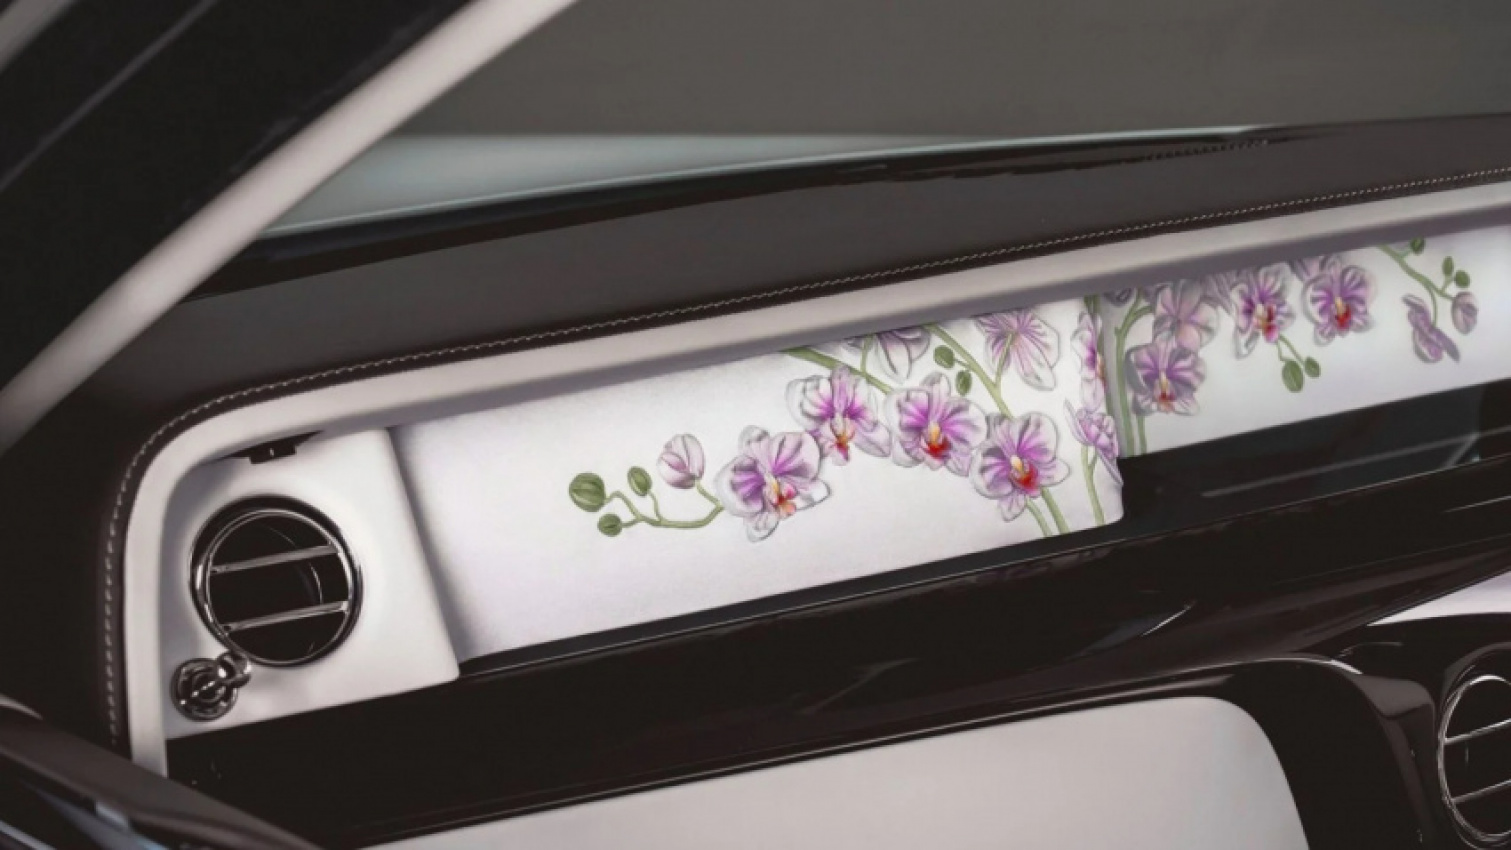 autos, cars, rolls-royce, car, cars, driven, driven nz, luxury edition, motoring, new zealand, news, nz, world, check out this stunning one-off rolls-royce phantom with hand sculpted orchids